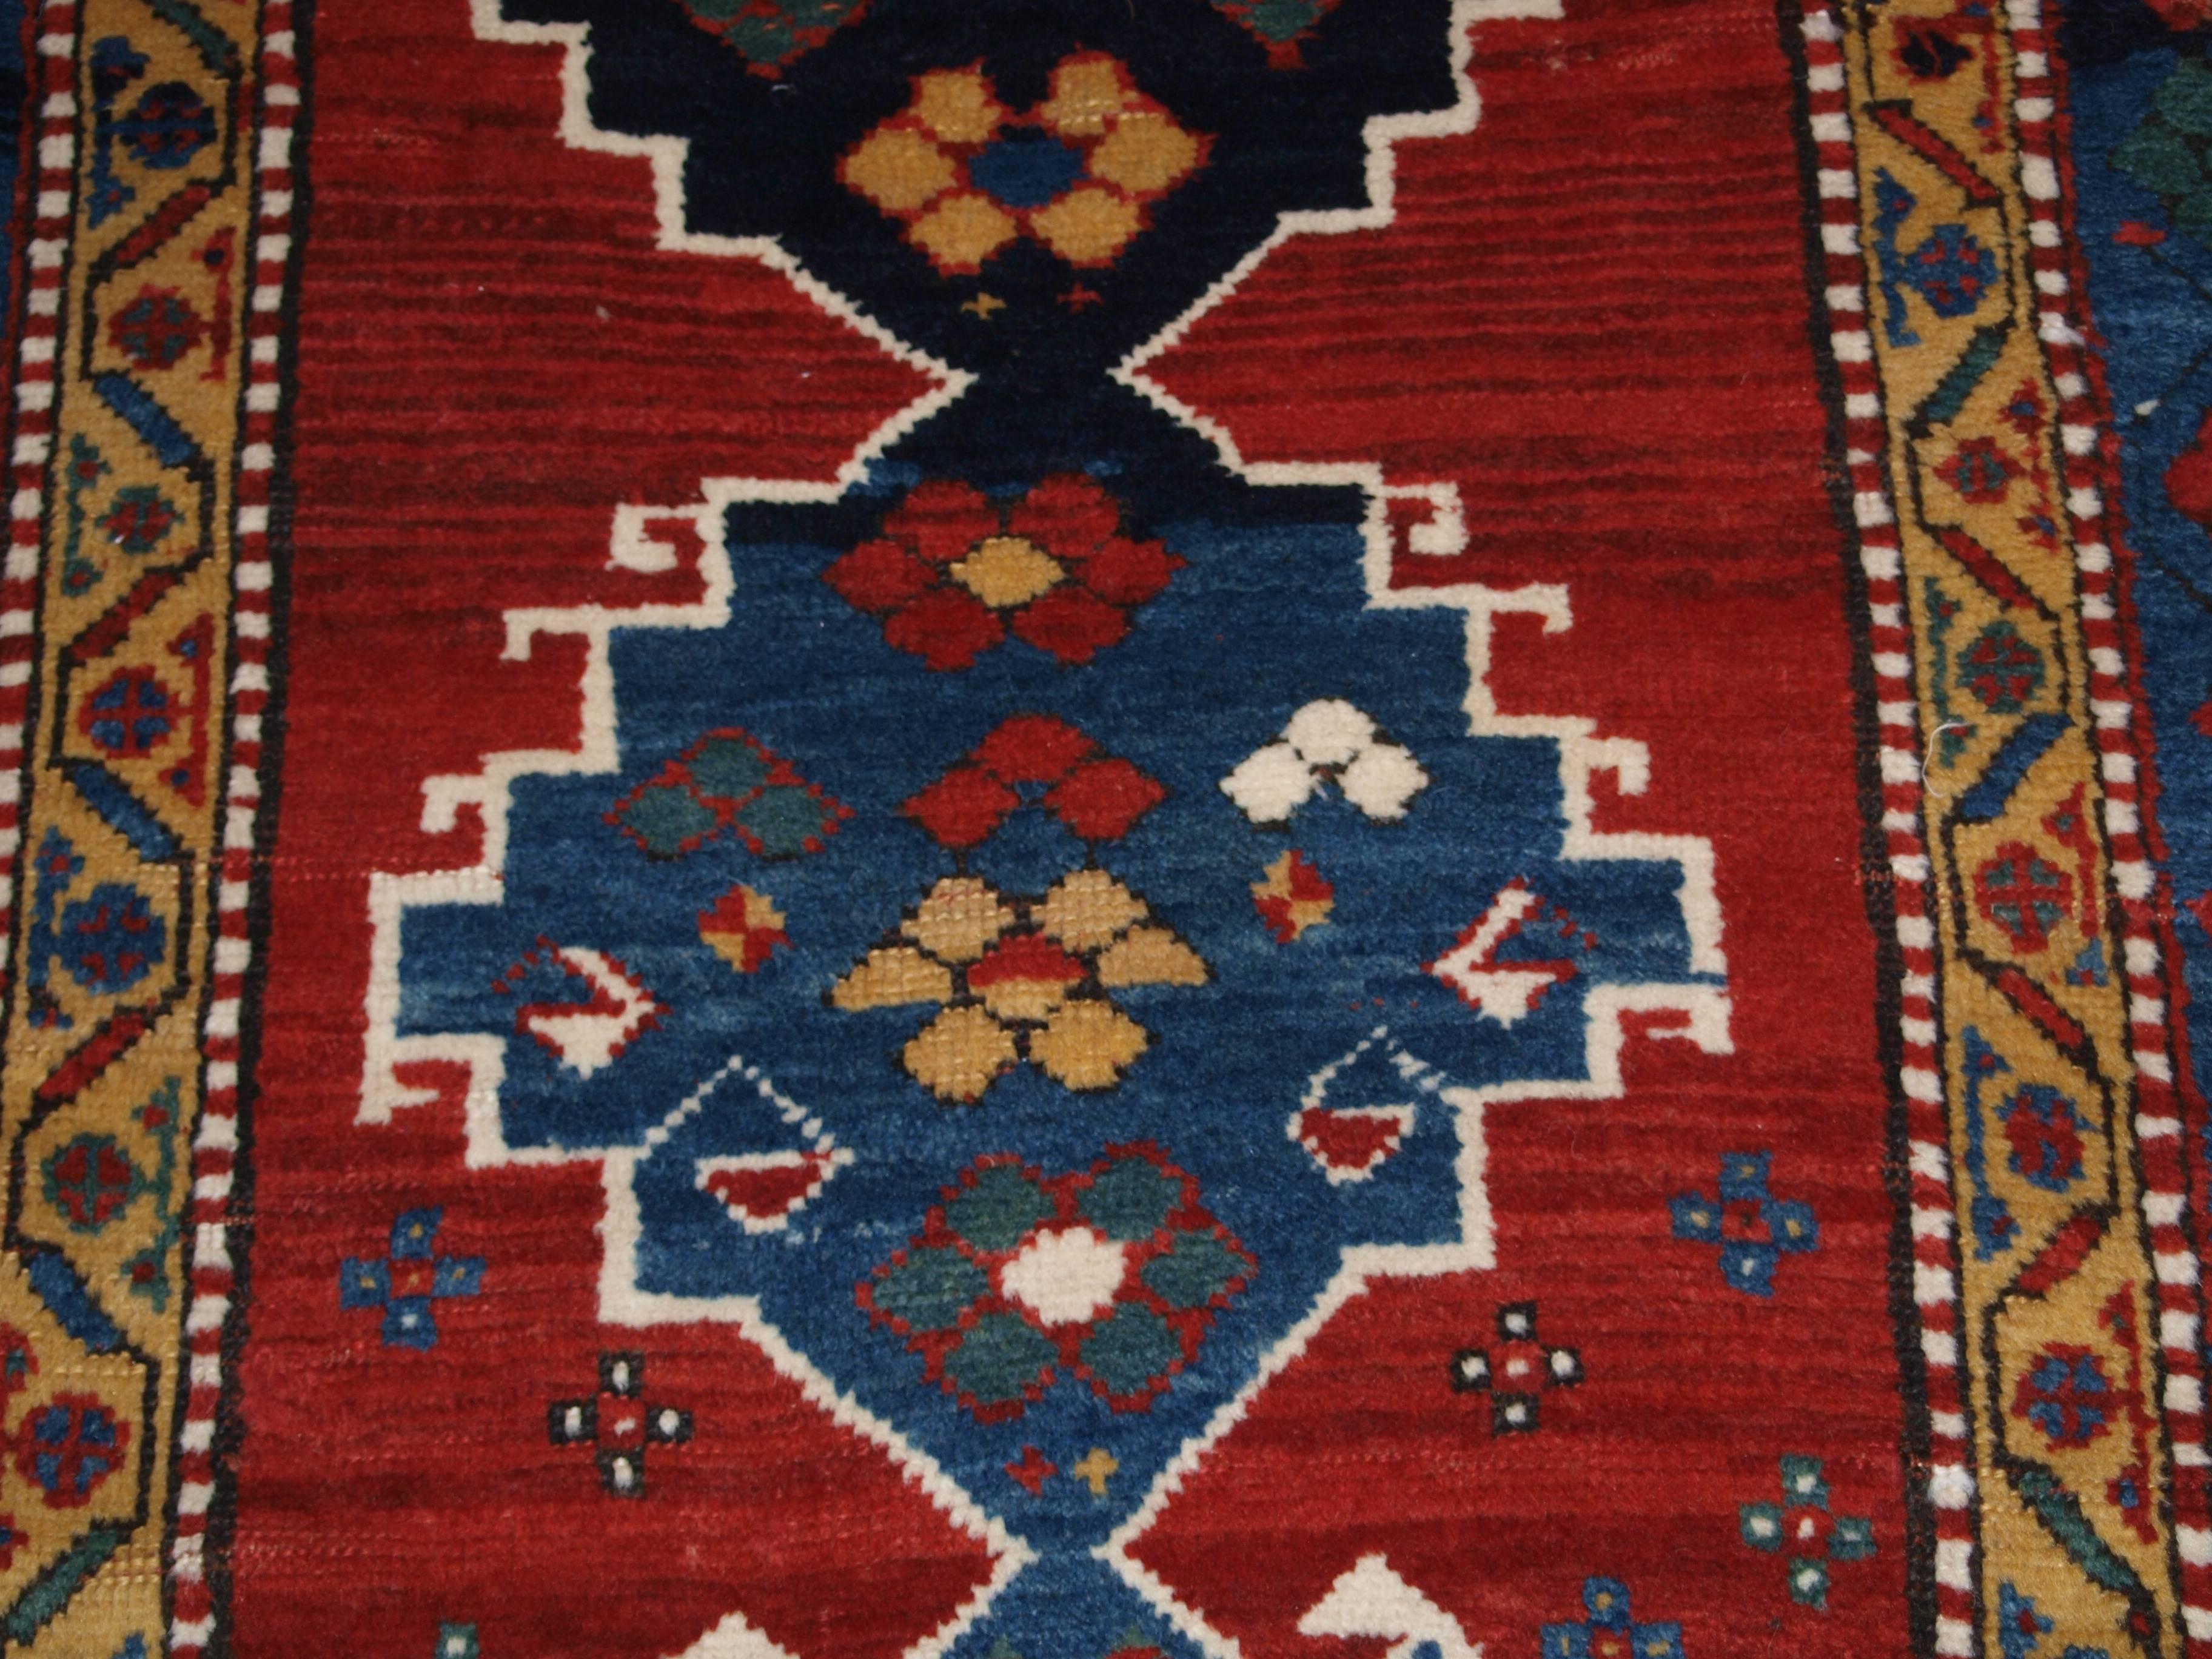 Antique Caucasian Kazak rug with superb colour and long glossy pile, late 19th century.
Size: 5ft 9in x 3ft 7in (175 x 110cm)

Antique Caucasian Kazak rug with linked medallion design.

Late 19th century

A superb Kazak rug with a single